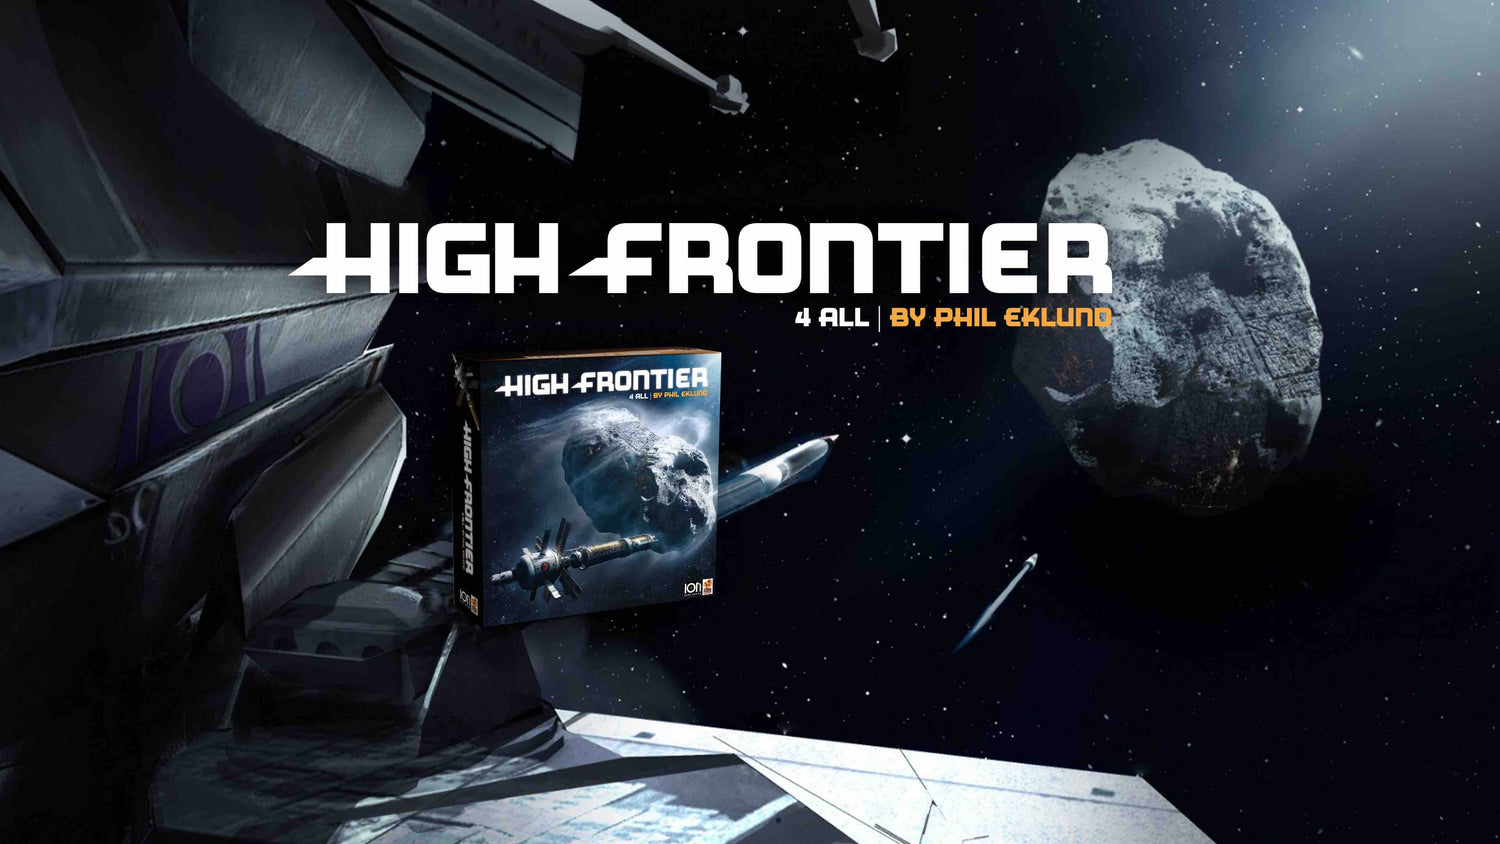 High Frontier 4 All explore our solar system